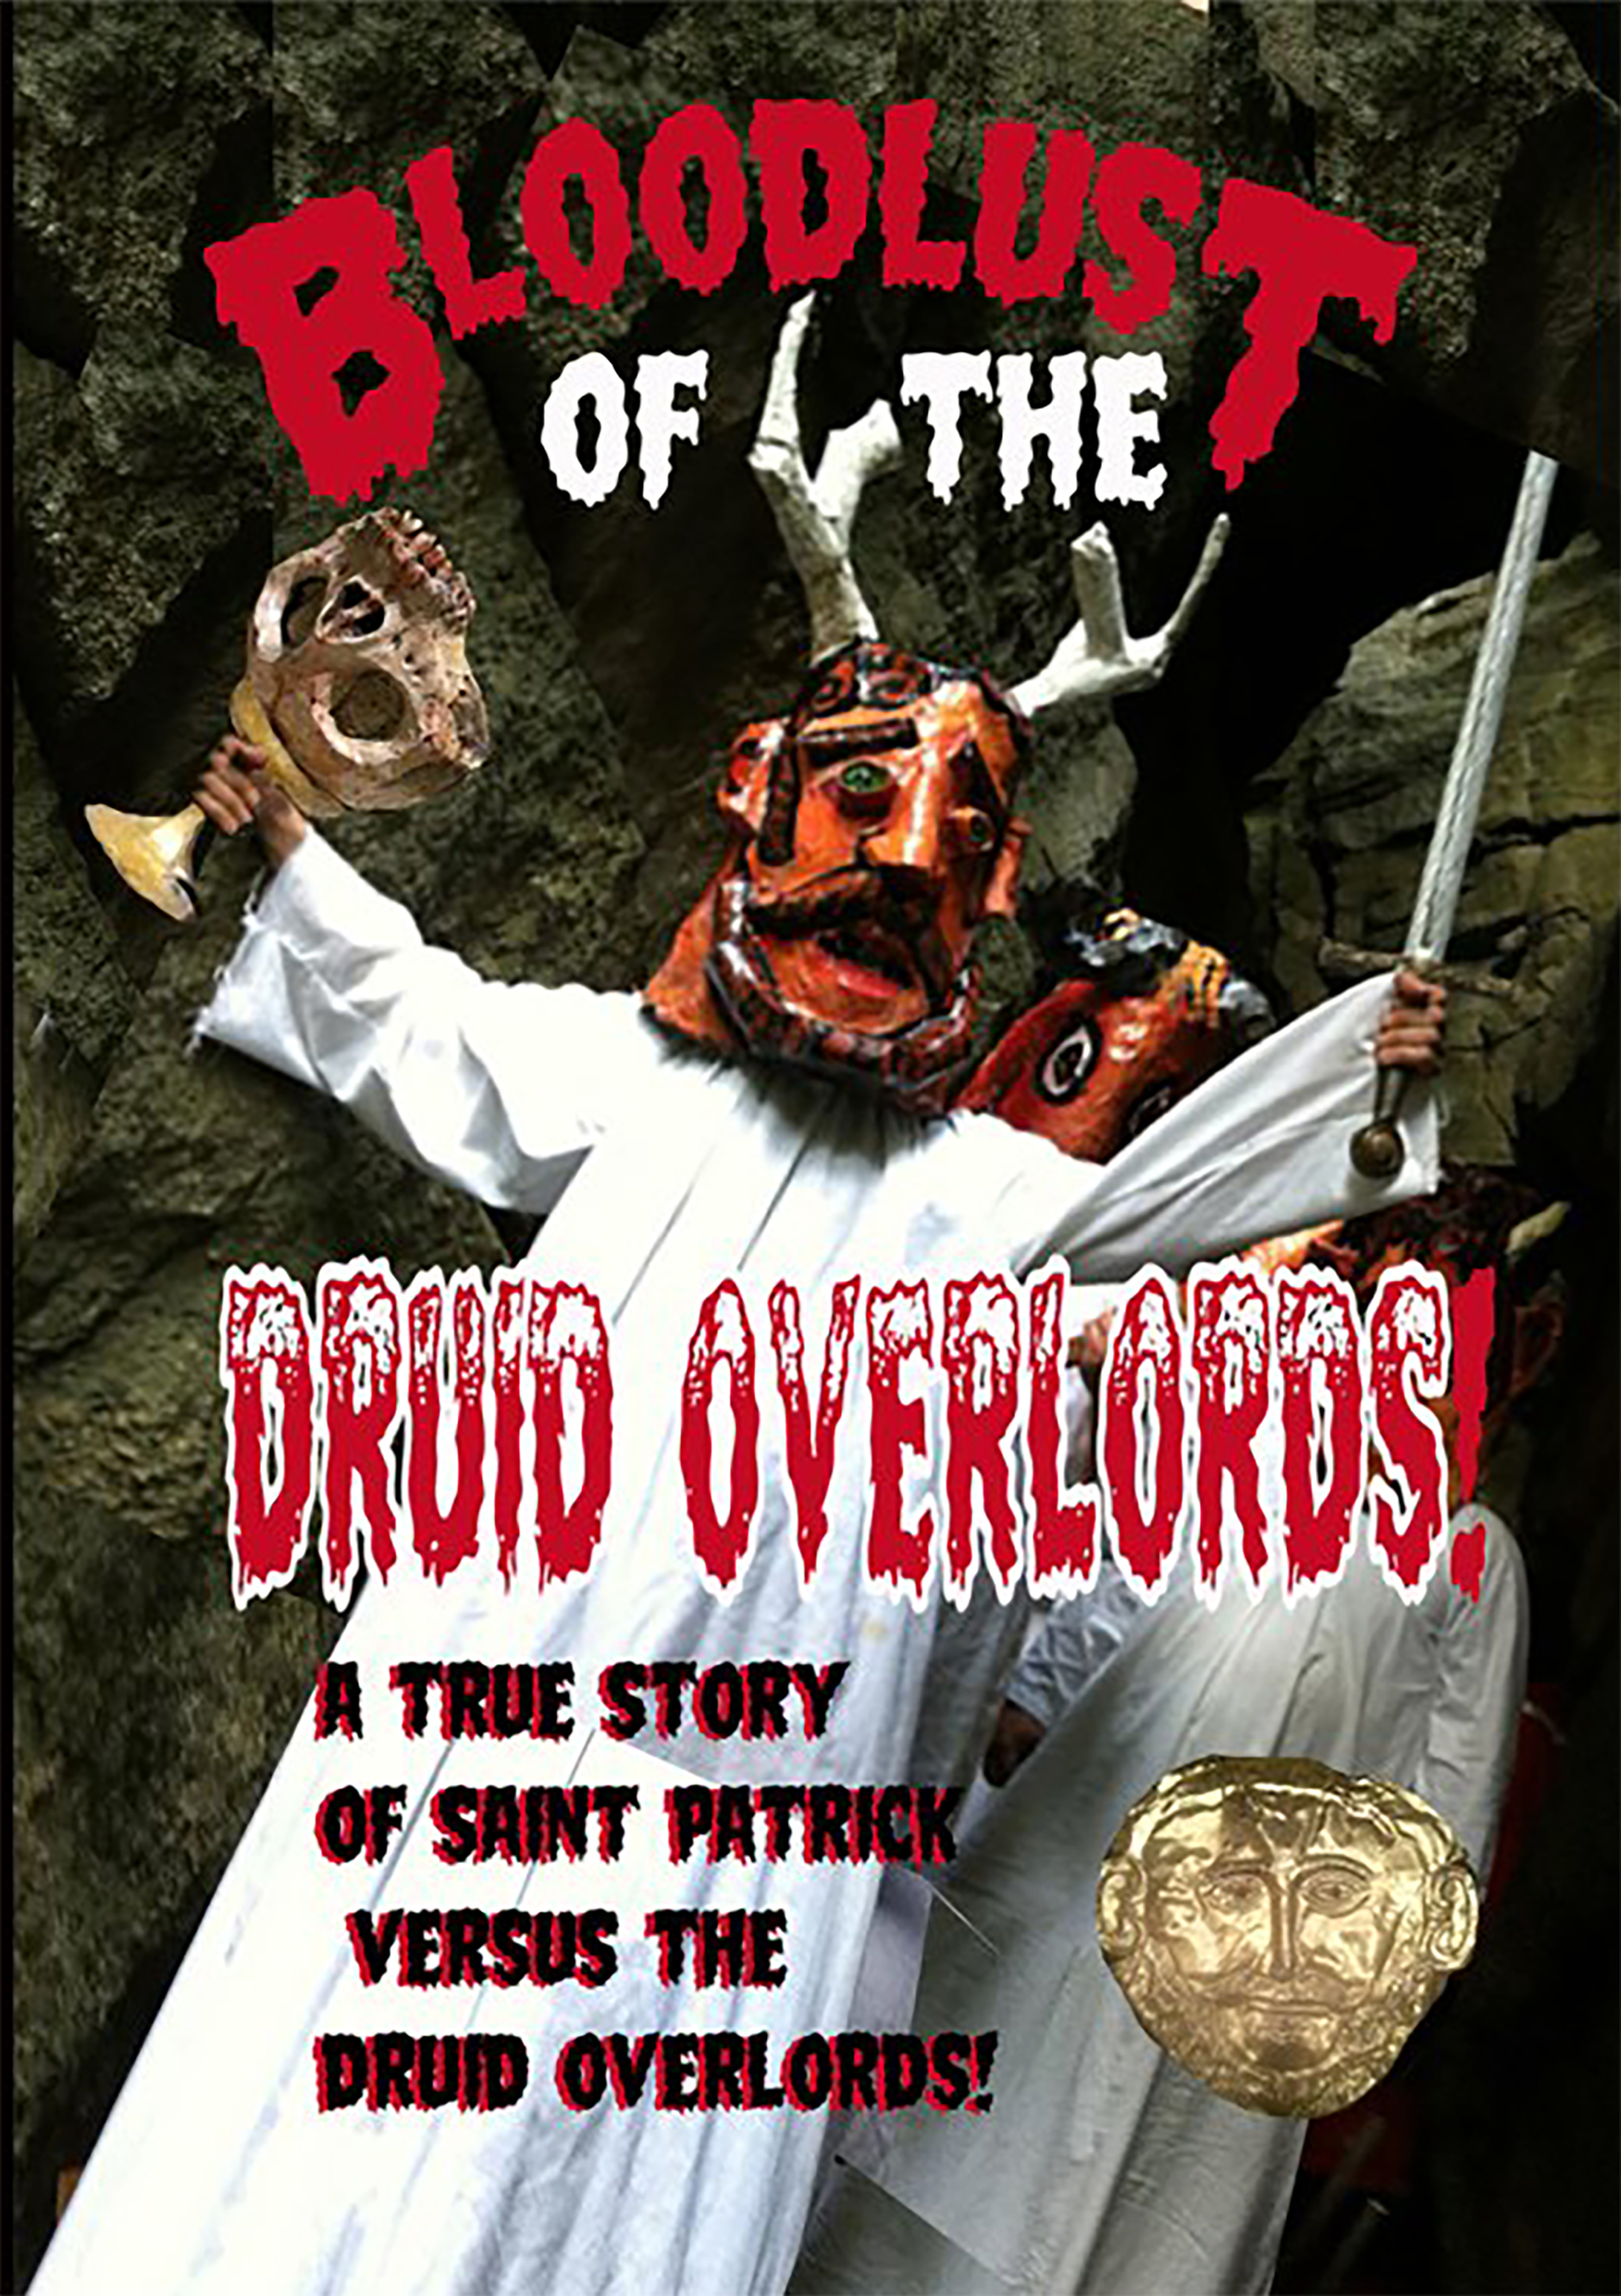 Bloodlust of the Druid Overlords (2013) Screenshot 1